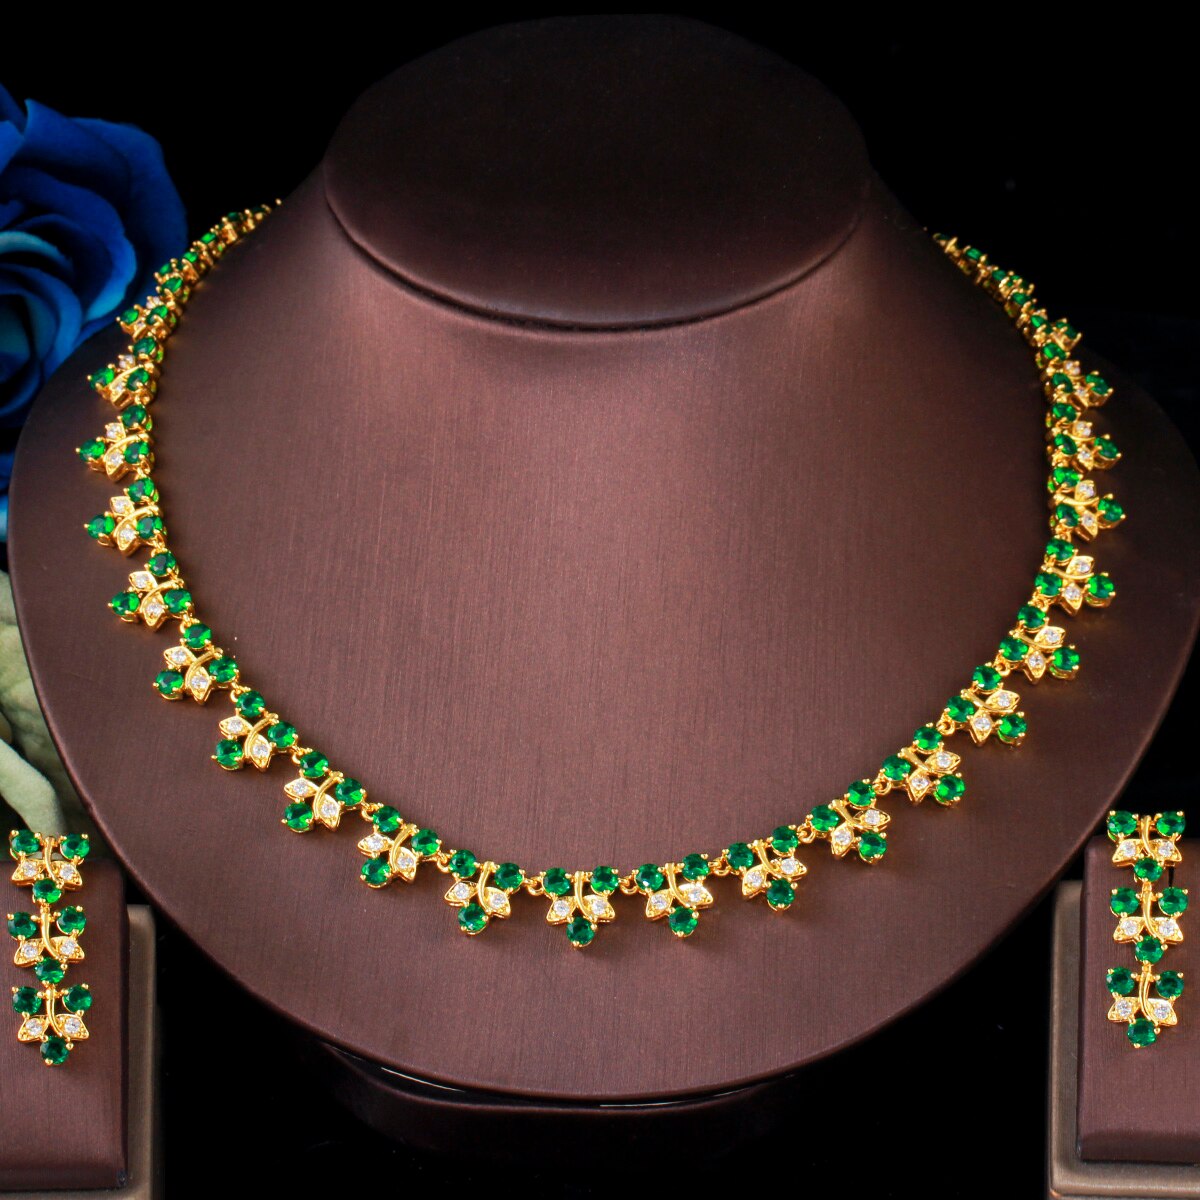 ThreeGraces-Natural-Green-Round-CZ-Stone-Dubai-Gold-Color-Bridal-Wedding-Necklace-Earrings-for-Bride-1005001597606751-12